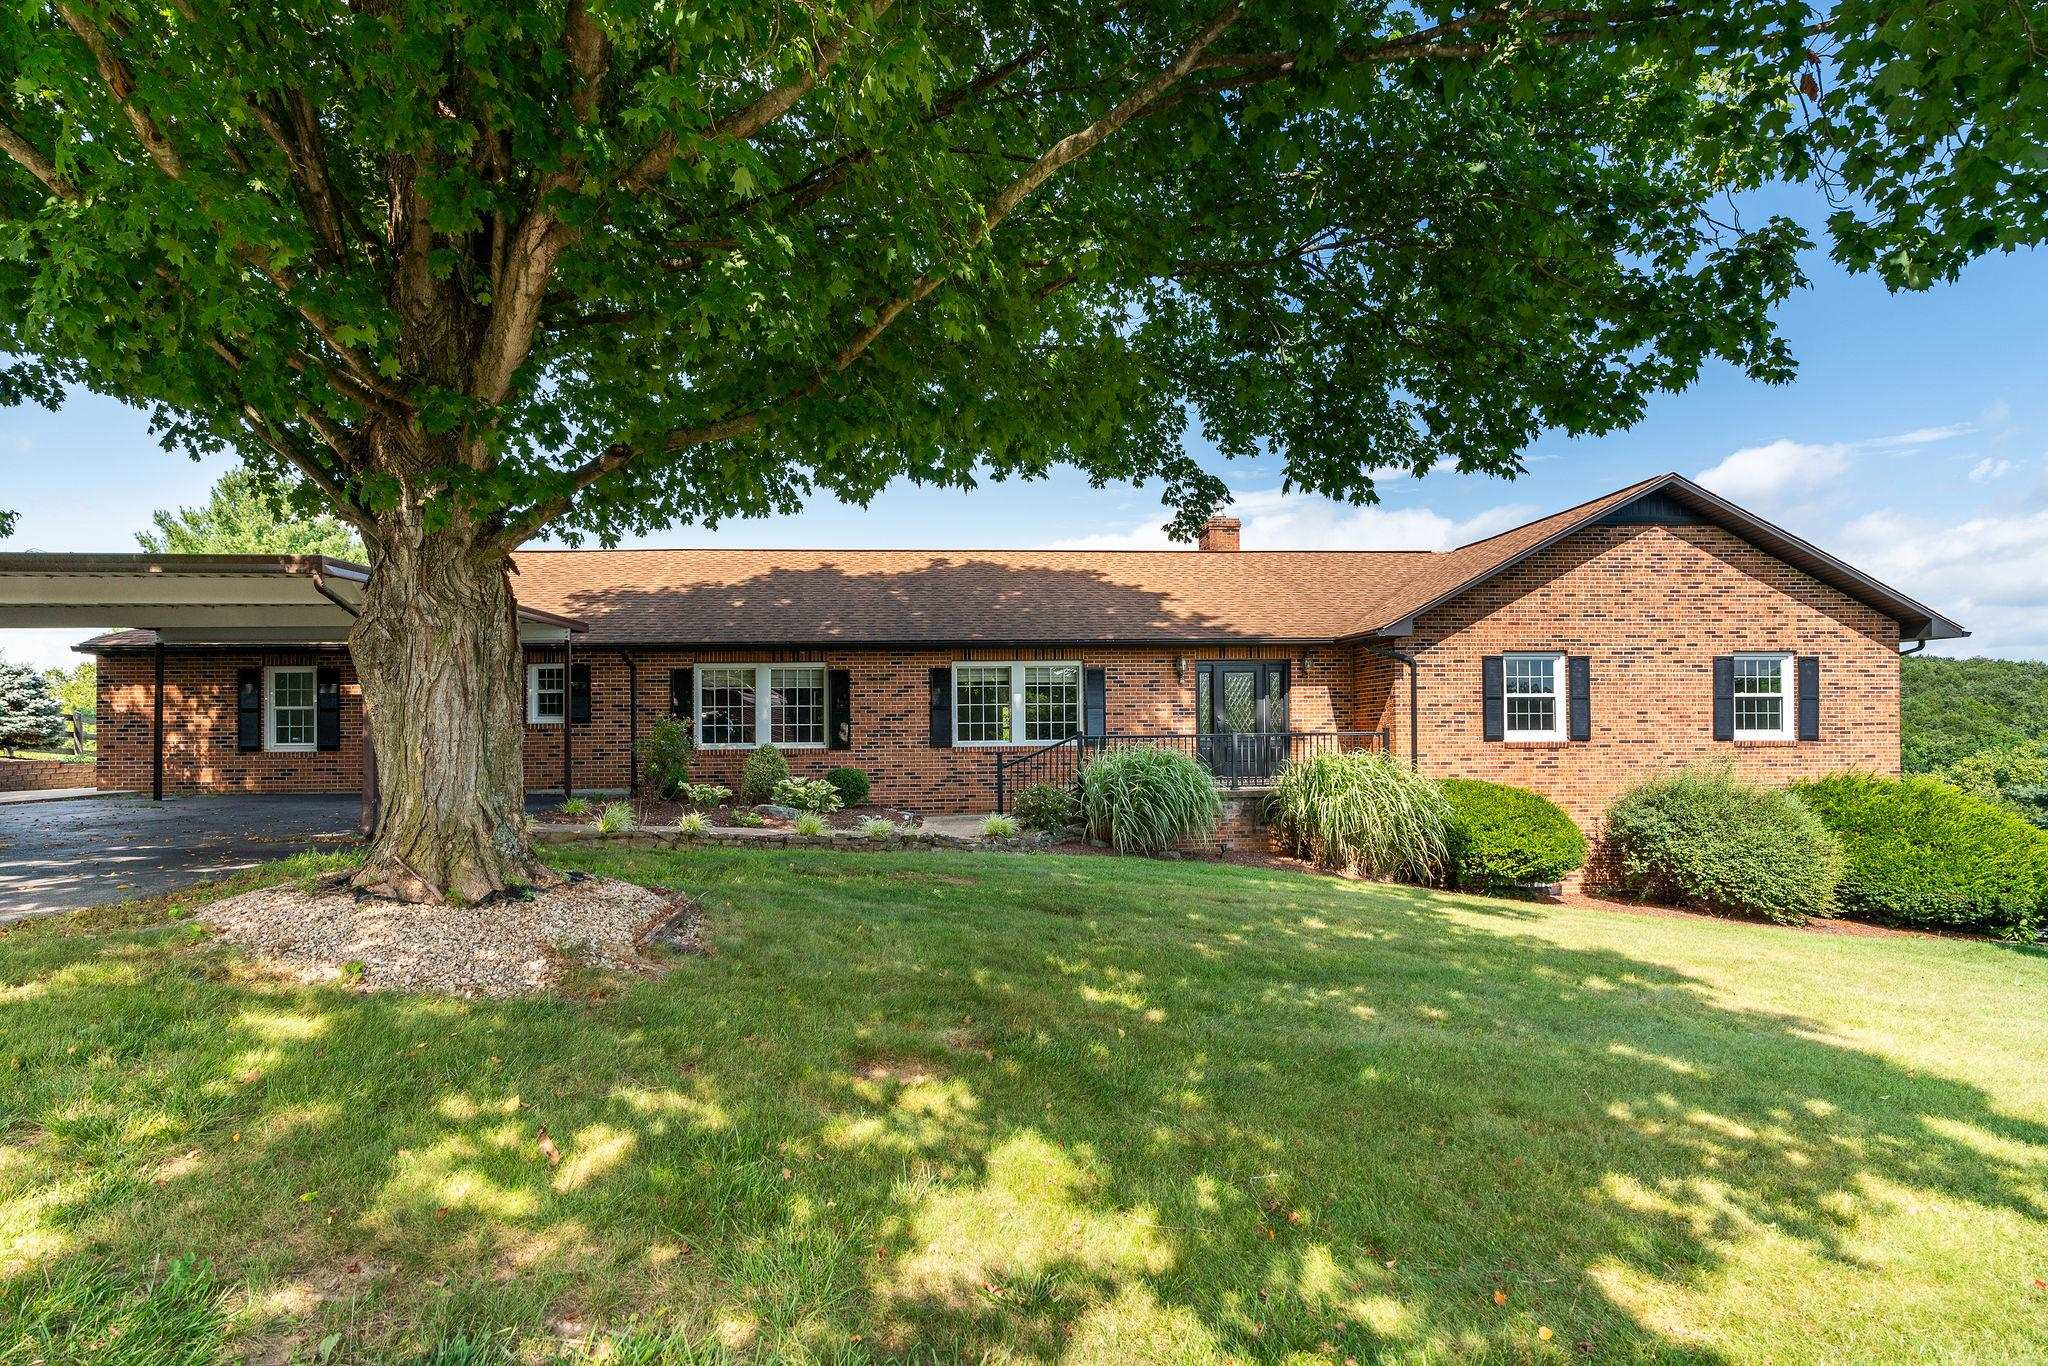 308 STONEWALL RD, WEYERS CAVE, Virginia 24486, 5 Bedrooms Bedrooms, ,5 BathroomsBathrooms,Residential,308 Stonewall Rd. 5000+ sq ft home on 7.8 acres.,308 STONEWALL RD,644238 MLS # 644238